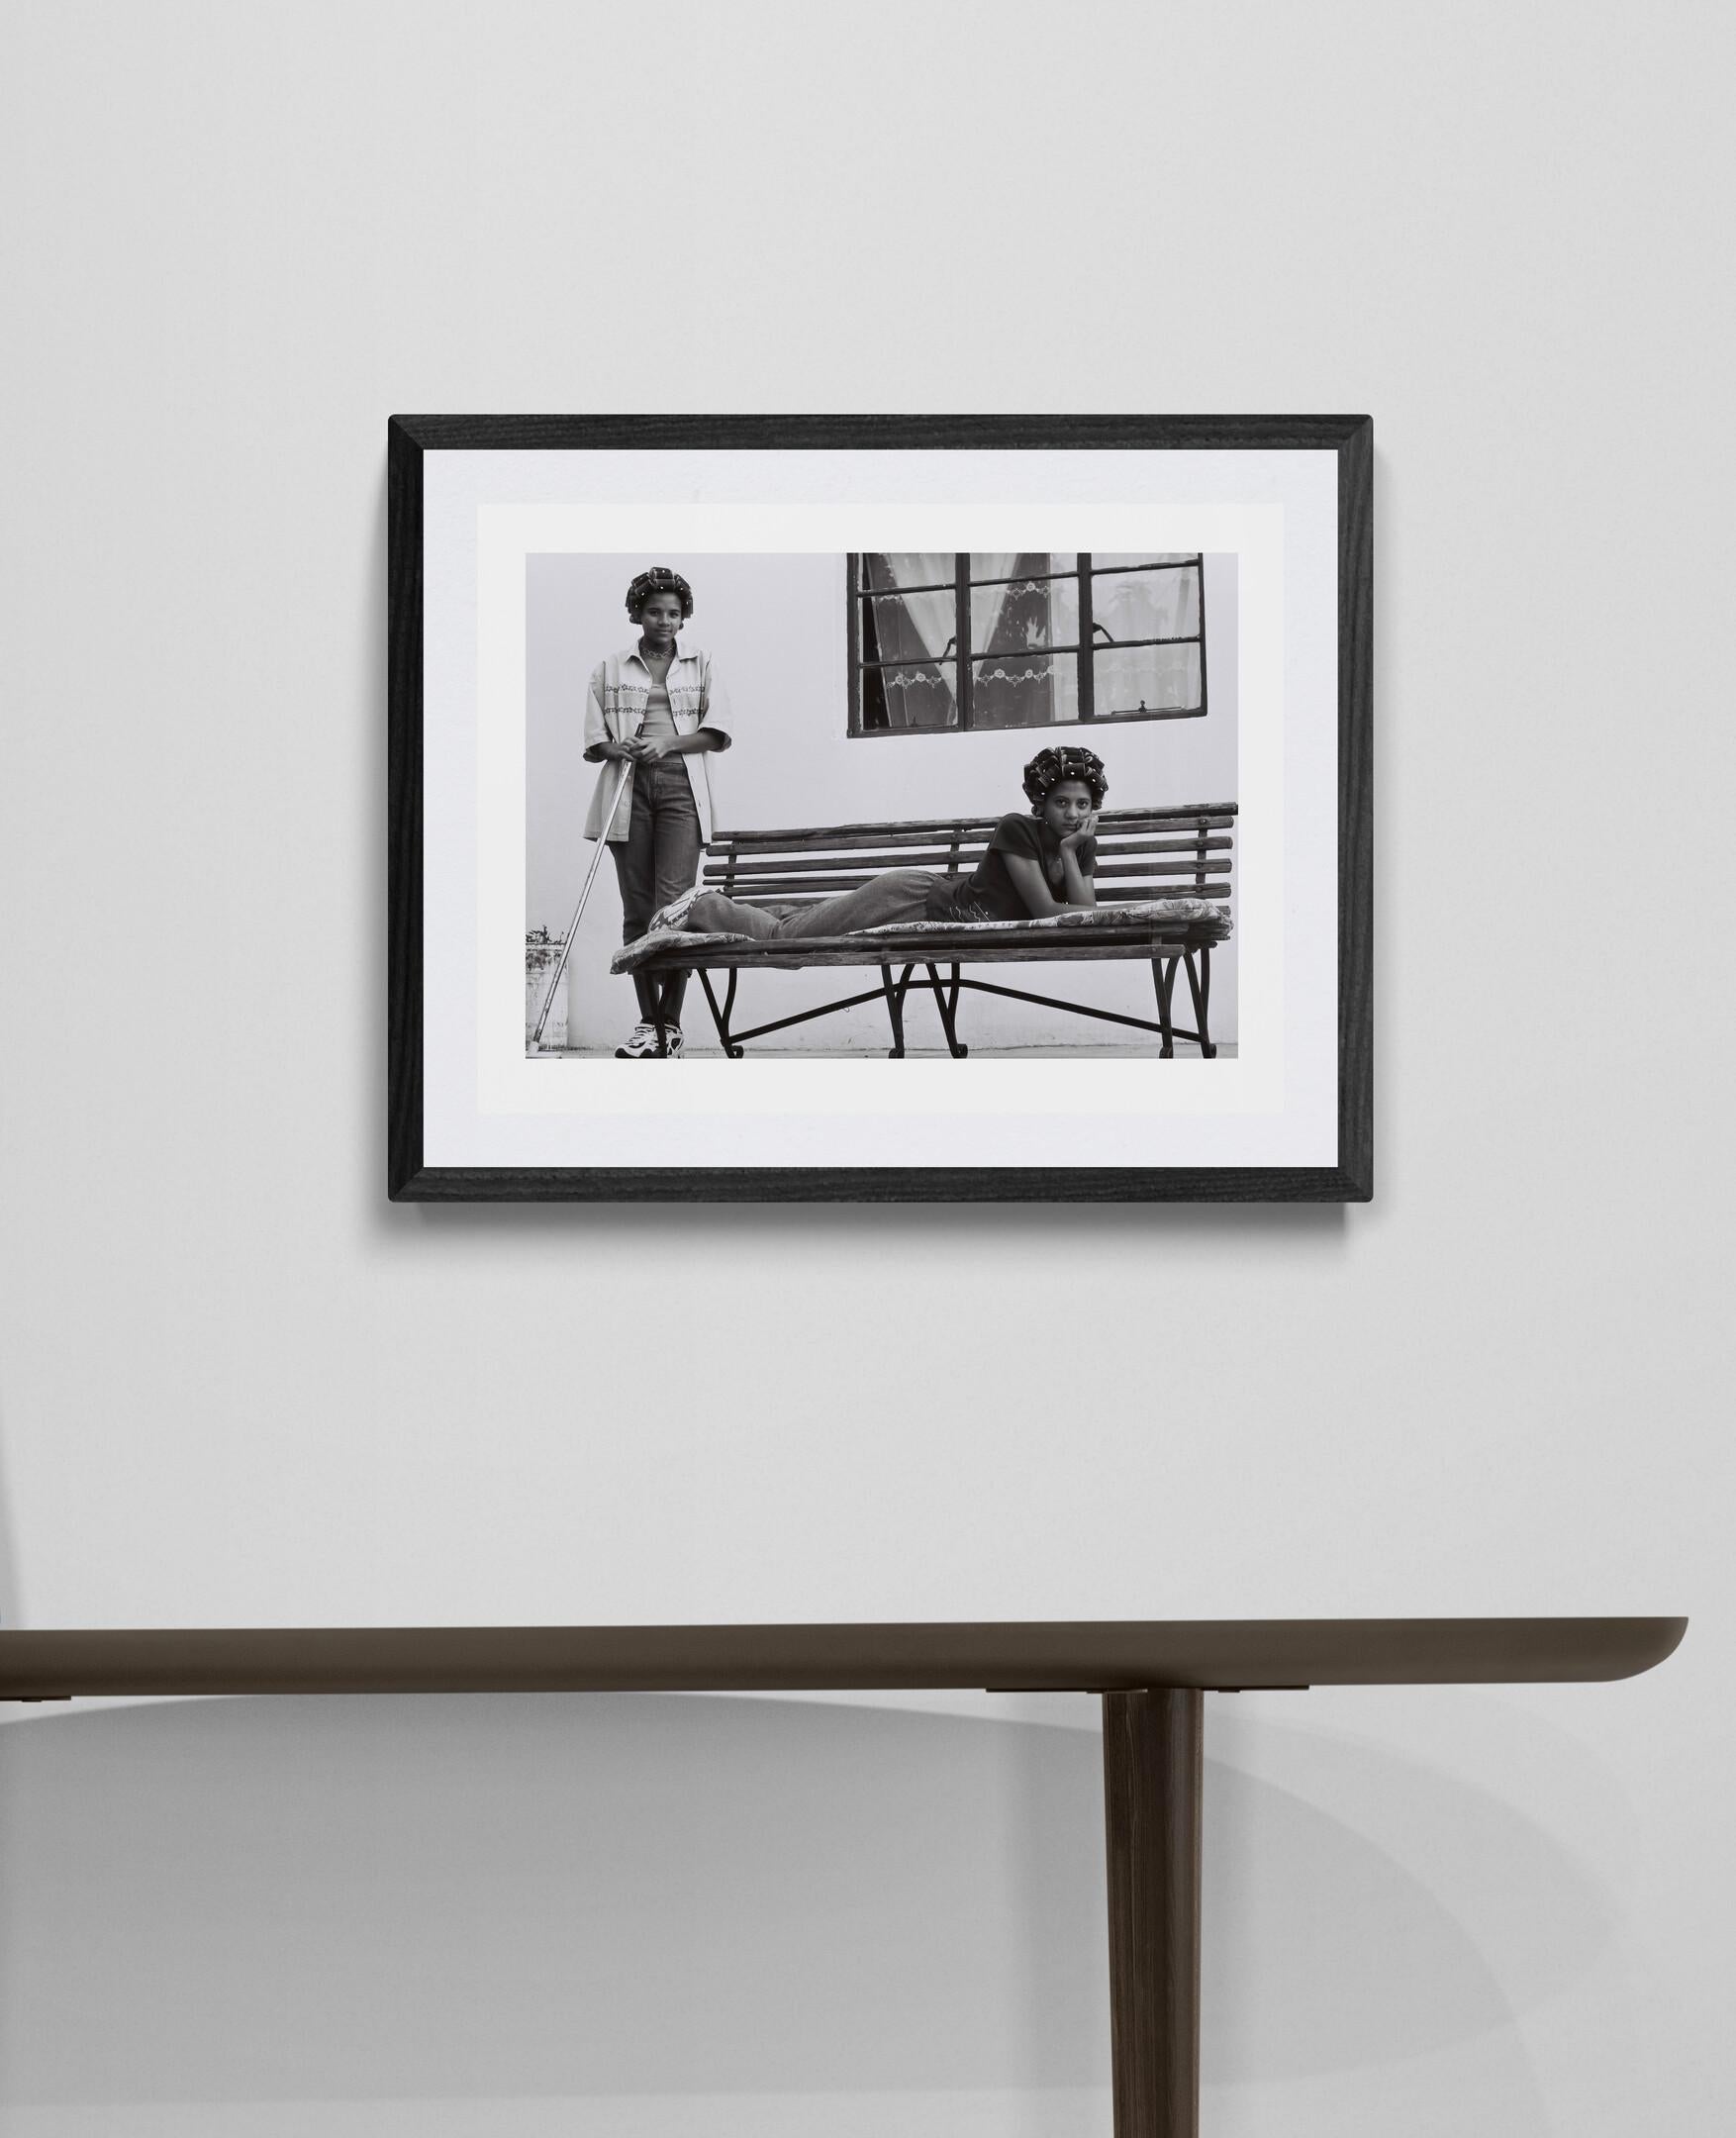 A limited edition (out of 25) black and white photographic print. Framed with a black or white box frame and floated to the backboard. The dimensions of 33.5 x 45 cm is that of the paper itself, excluding the size of the frame. Contact us for